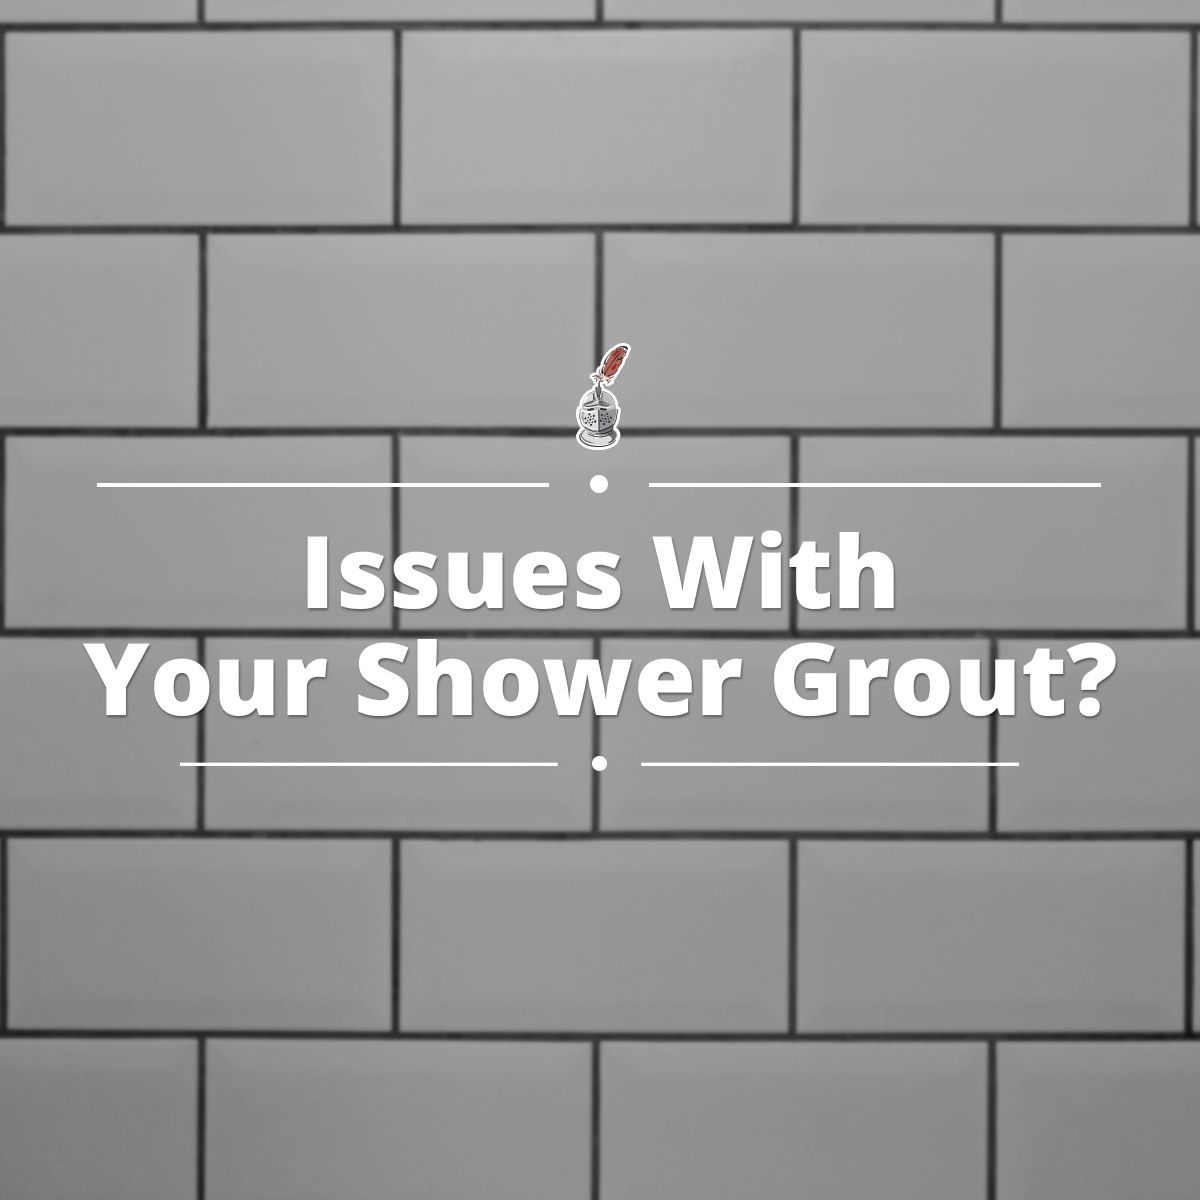 Issues With Your Shower Grout?